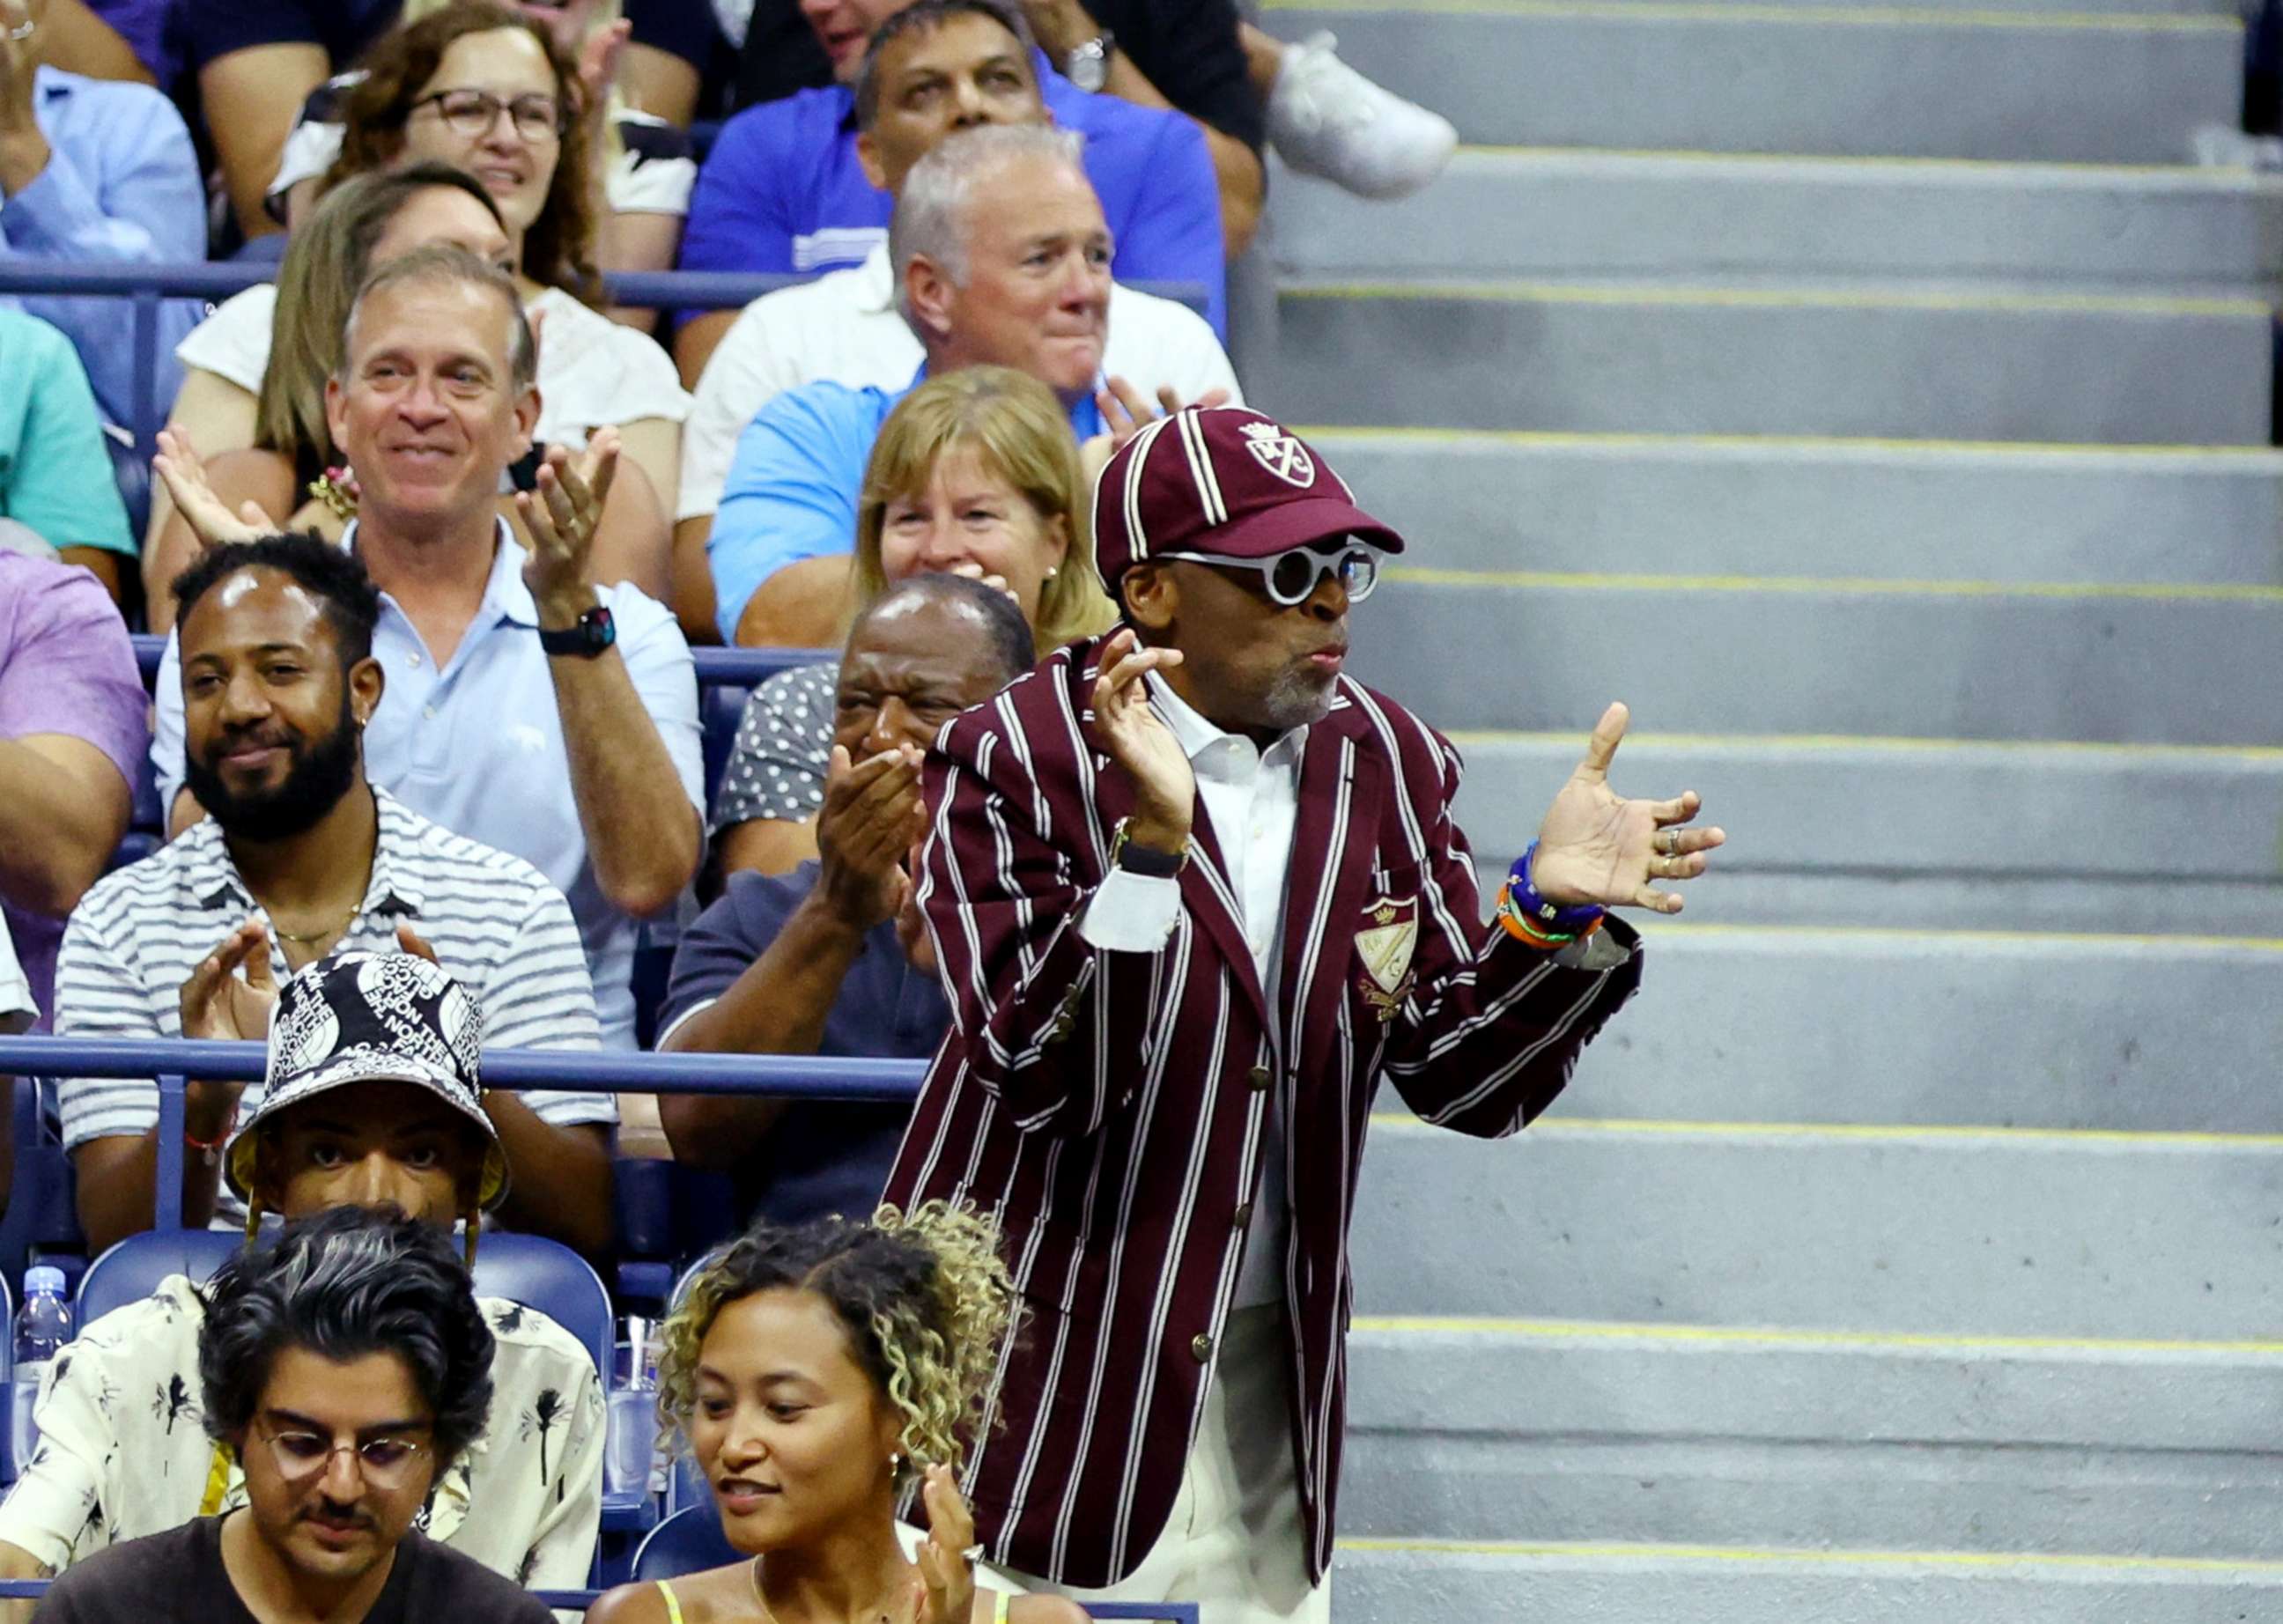 PHOTO: Film director Spike Lee reacts in the stand during the second round match between Serena Williams of the U.S. and Estonia's Anett Kontaveit during the U.S. Open in New York, Aug. 31, 2022.